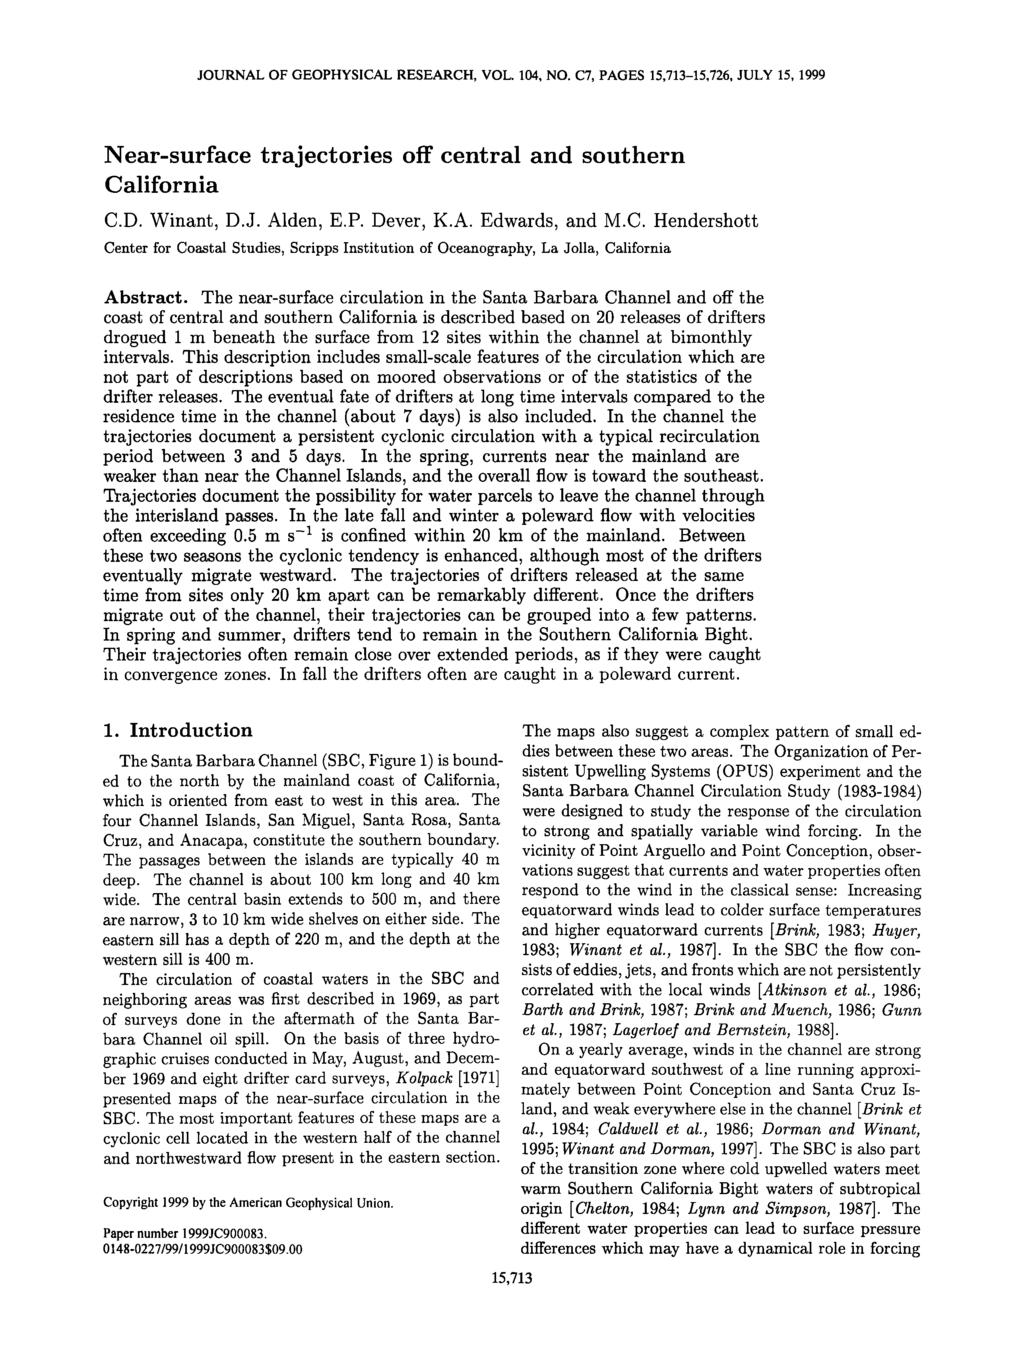 JOURNAL OF GEOPHYSICAL RESEARCH, VOL. 104, NO. C7, PAGES 15,713-15,726, JULY 15, 1999 Nearssurface trajectories California off central and southern C.D. Winant, D.J. Alden, E.P. Dever, K.A. Edwards, and M.